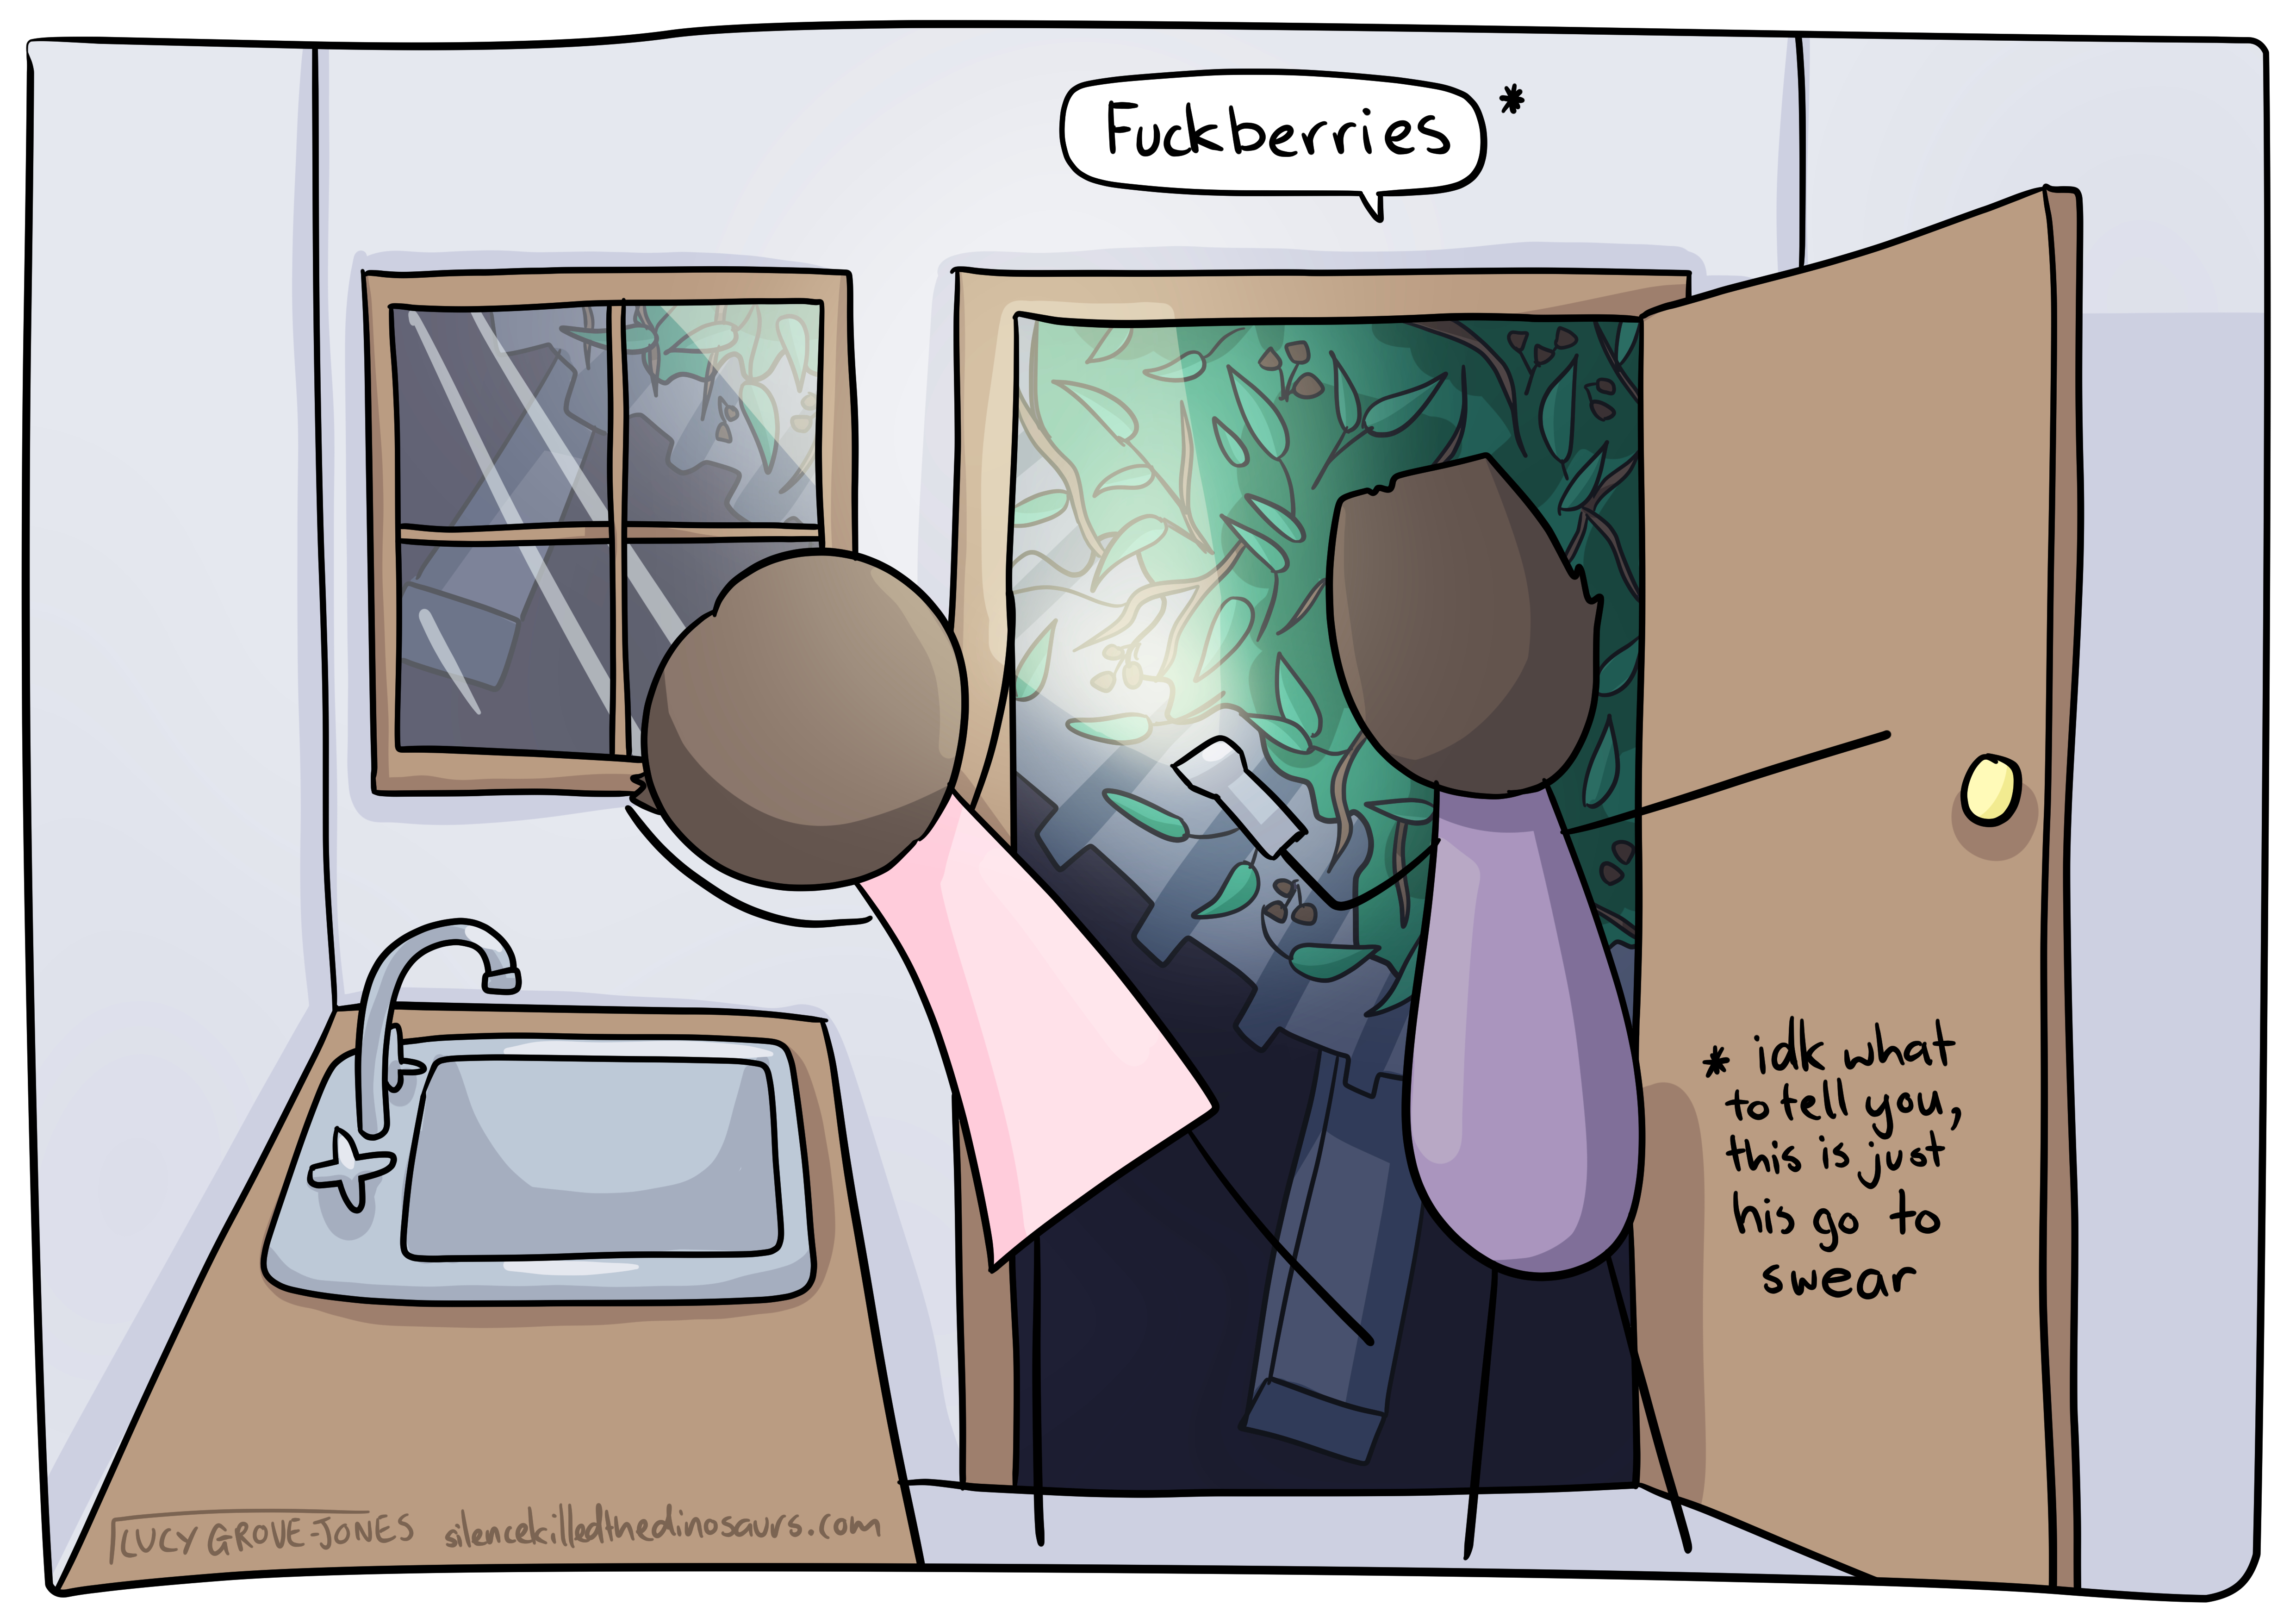 Comic Lucy and her partner peer out a door completely blocked by tree branches. Partner says 'Fuckberries*' written in corner: *idk what to tell you, this is just his go to swear